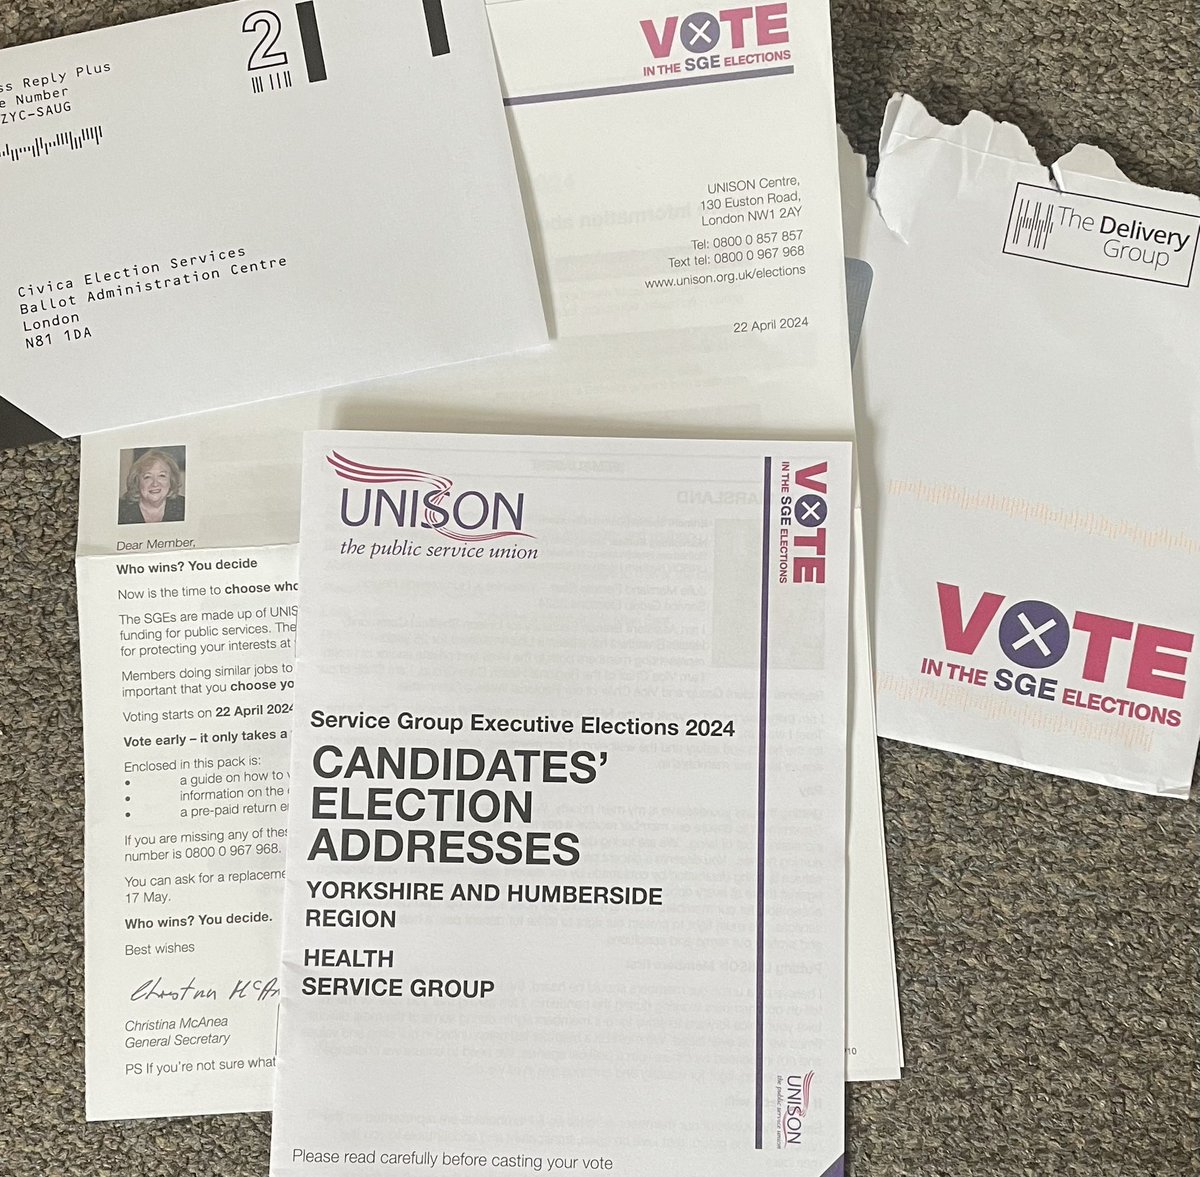 Please look out for your paperwork to vote in the @unisontheunion service group executive elections - arriving through your letter box any day now! Don’t lose your chance to decide who represents your interests. @unisonyh